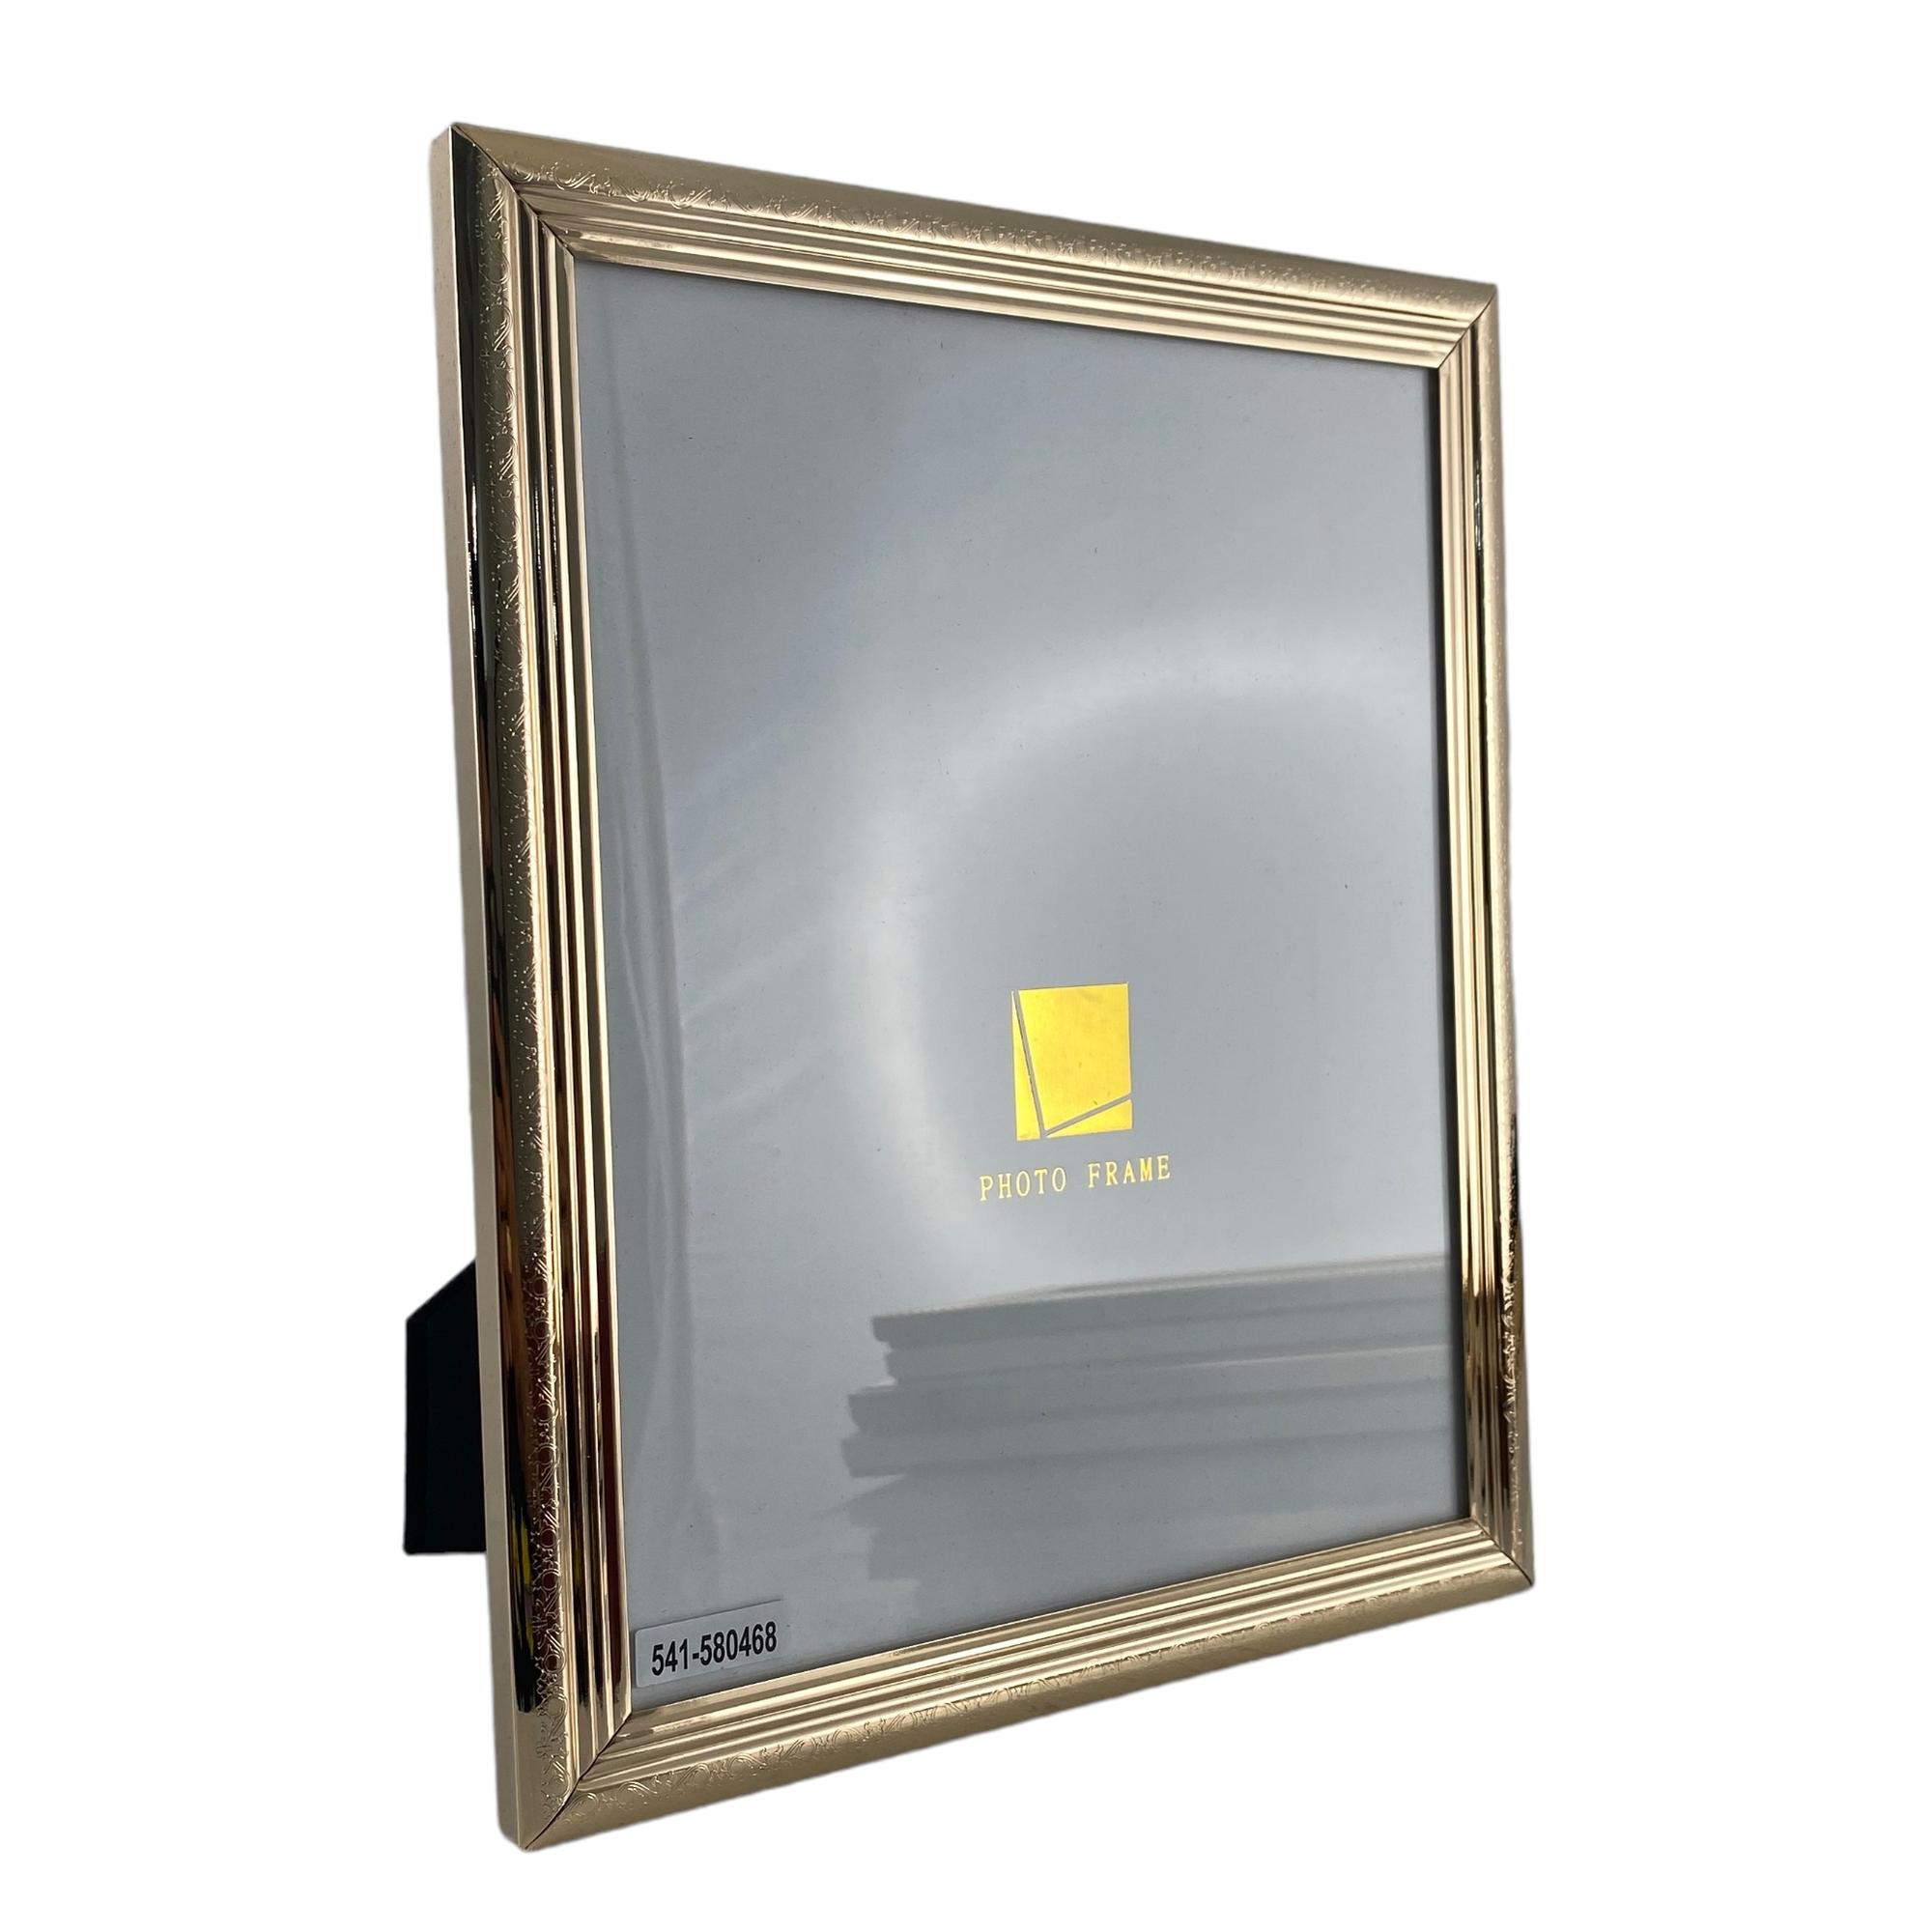 PICTURE FRAME 8X10 28.2X23.7X1. - 541-580468